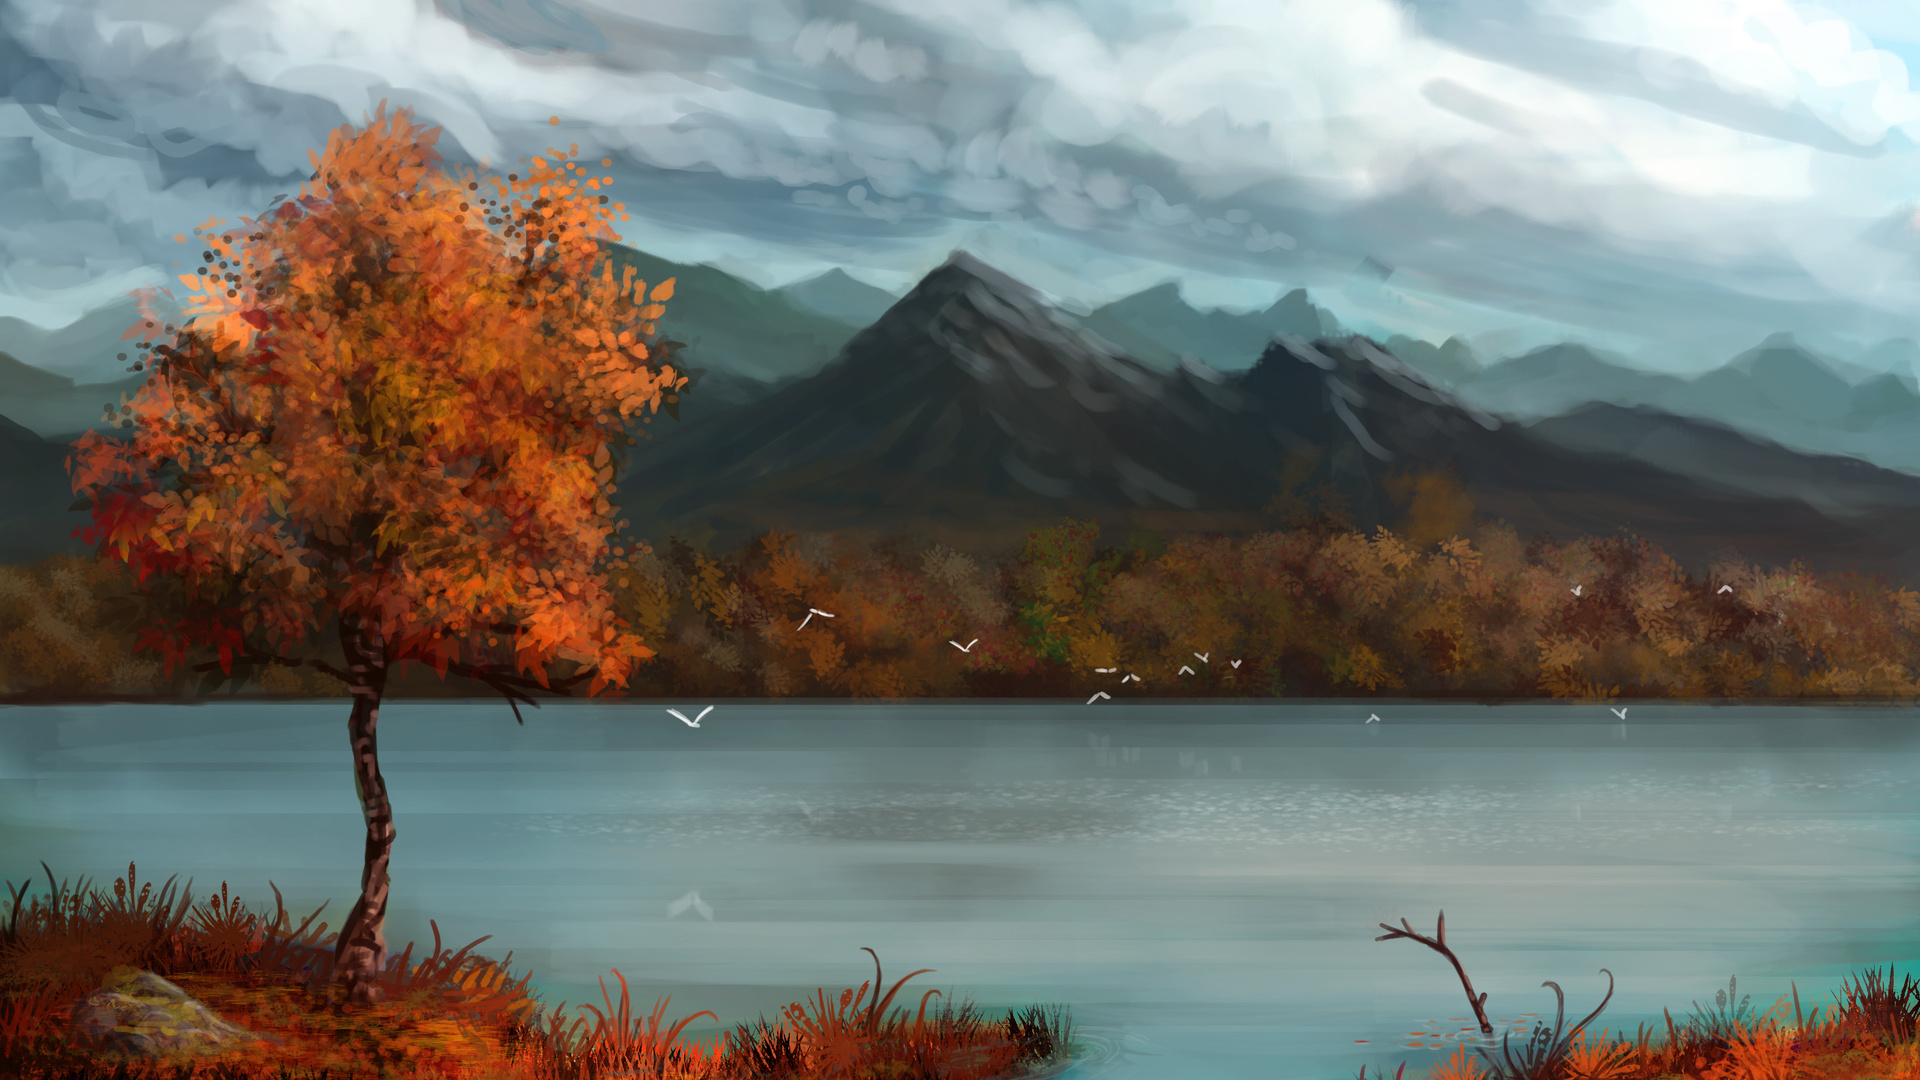 paintings, Art, Landscapes, Lakes, Mountains, Sky, Clouds, Tree, Forest, Autumn, Fall Wallpaper